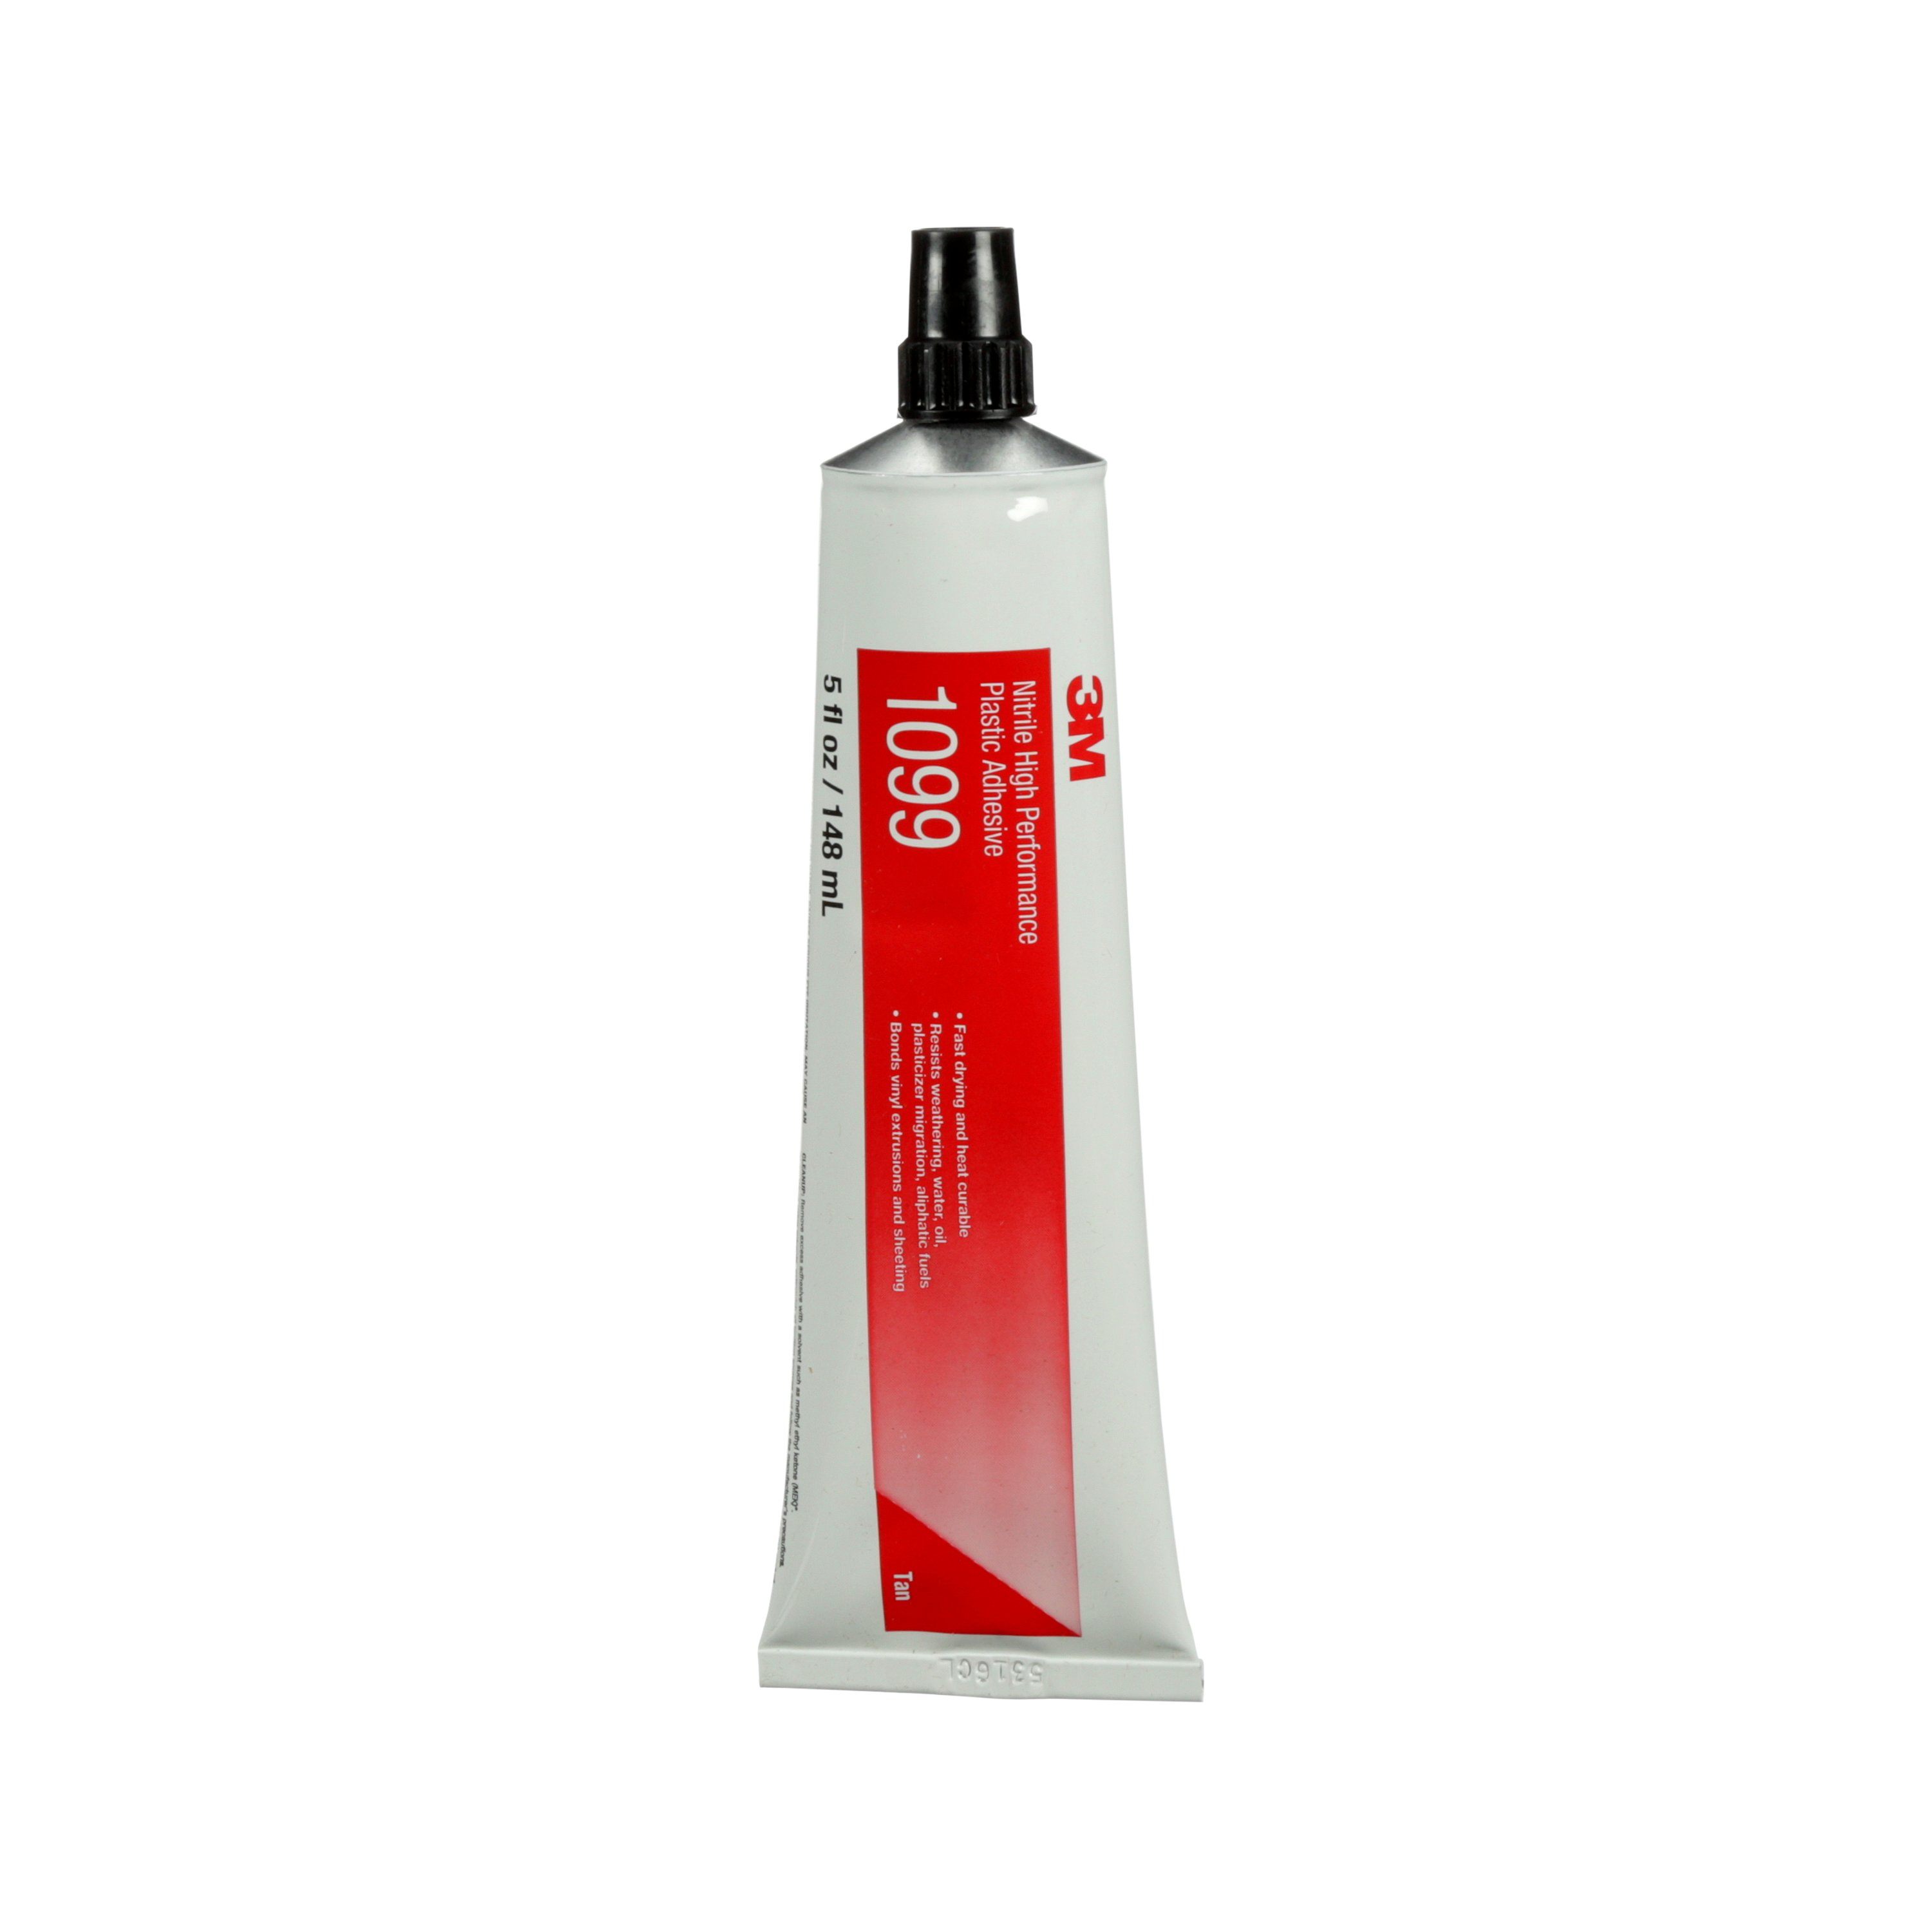 The 3M™ Nitrile High Performance Plastic Adhesive 1099 bonds to a variety of substrates —  primarily leather and most vinyl sheeting as used in awnings, upholstery and faux leather —  as well as plastics, for a strong, enduring bond.